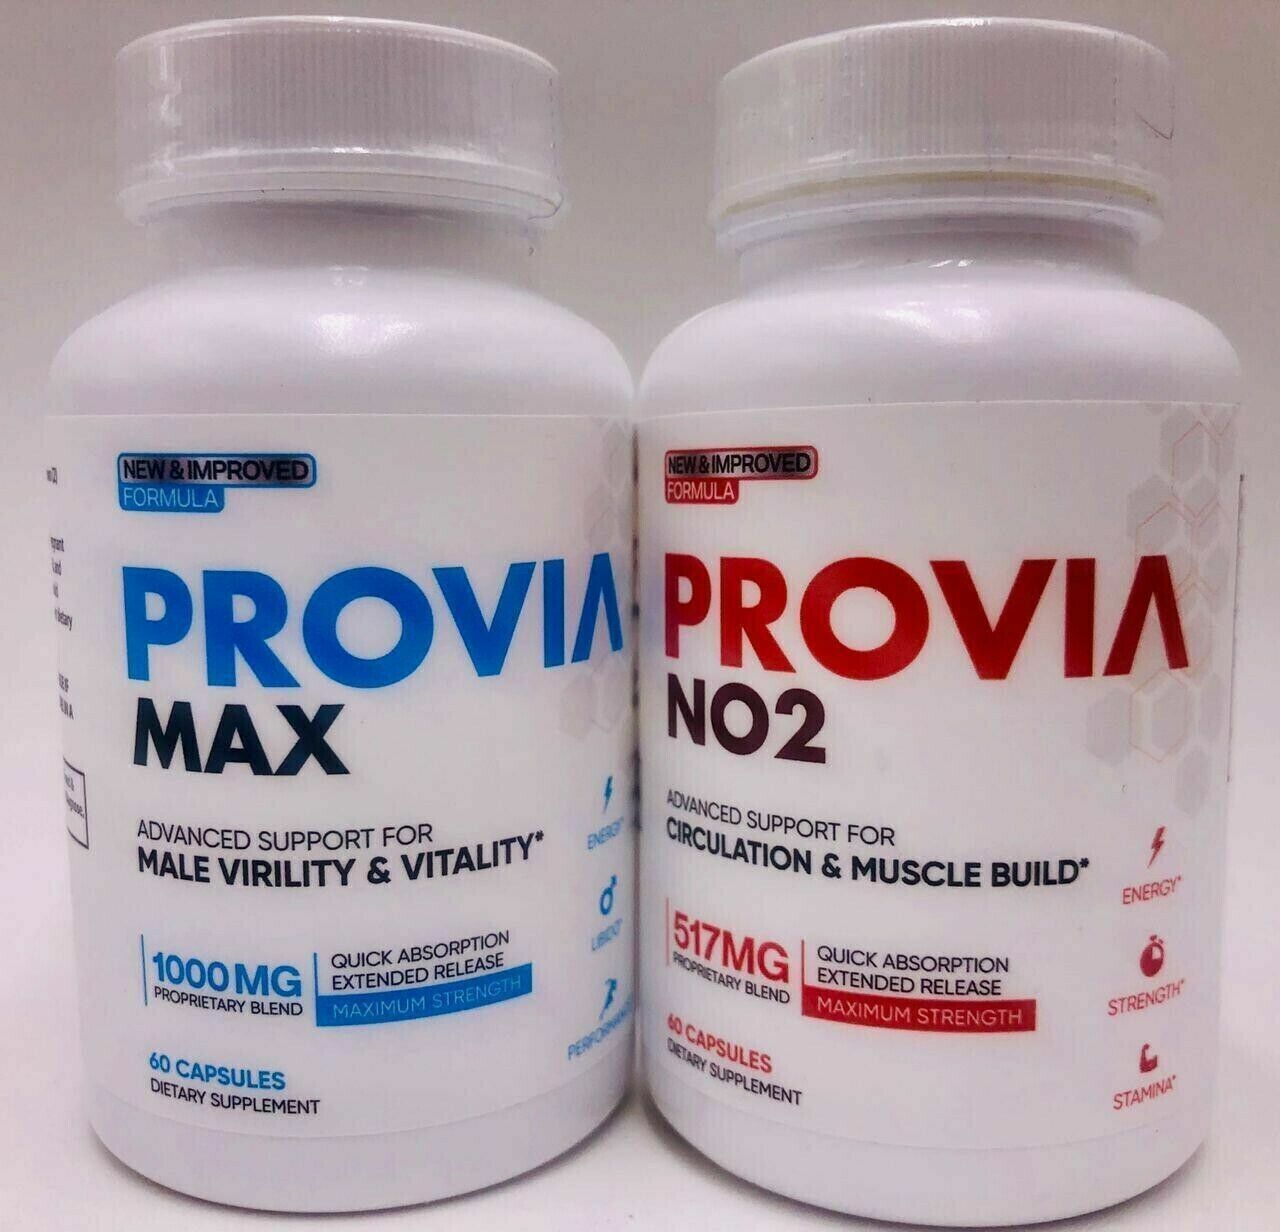 Provia Max Male Virility and Vitality Support and Provia NO2 Boost